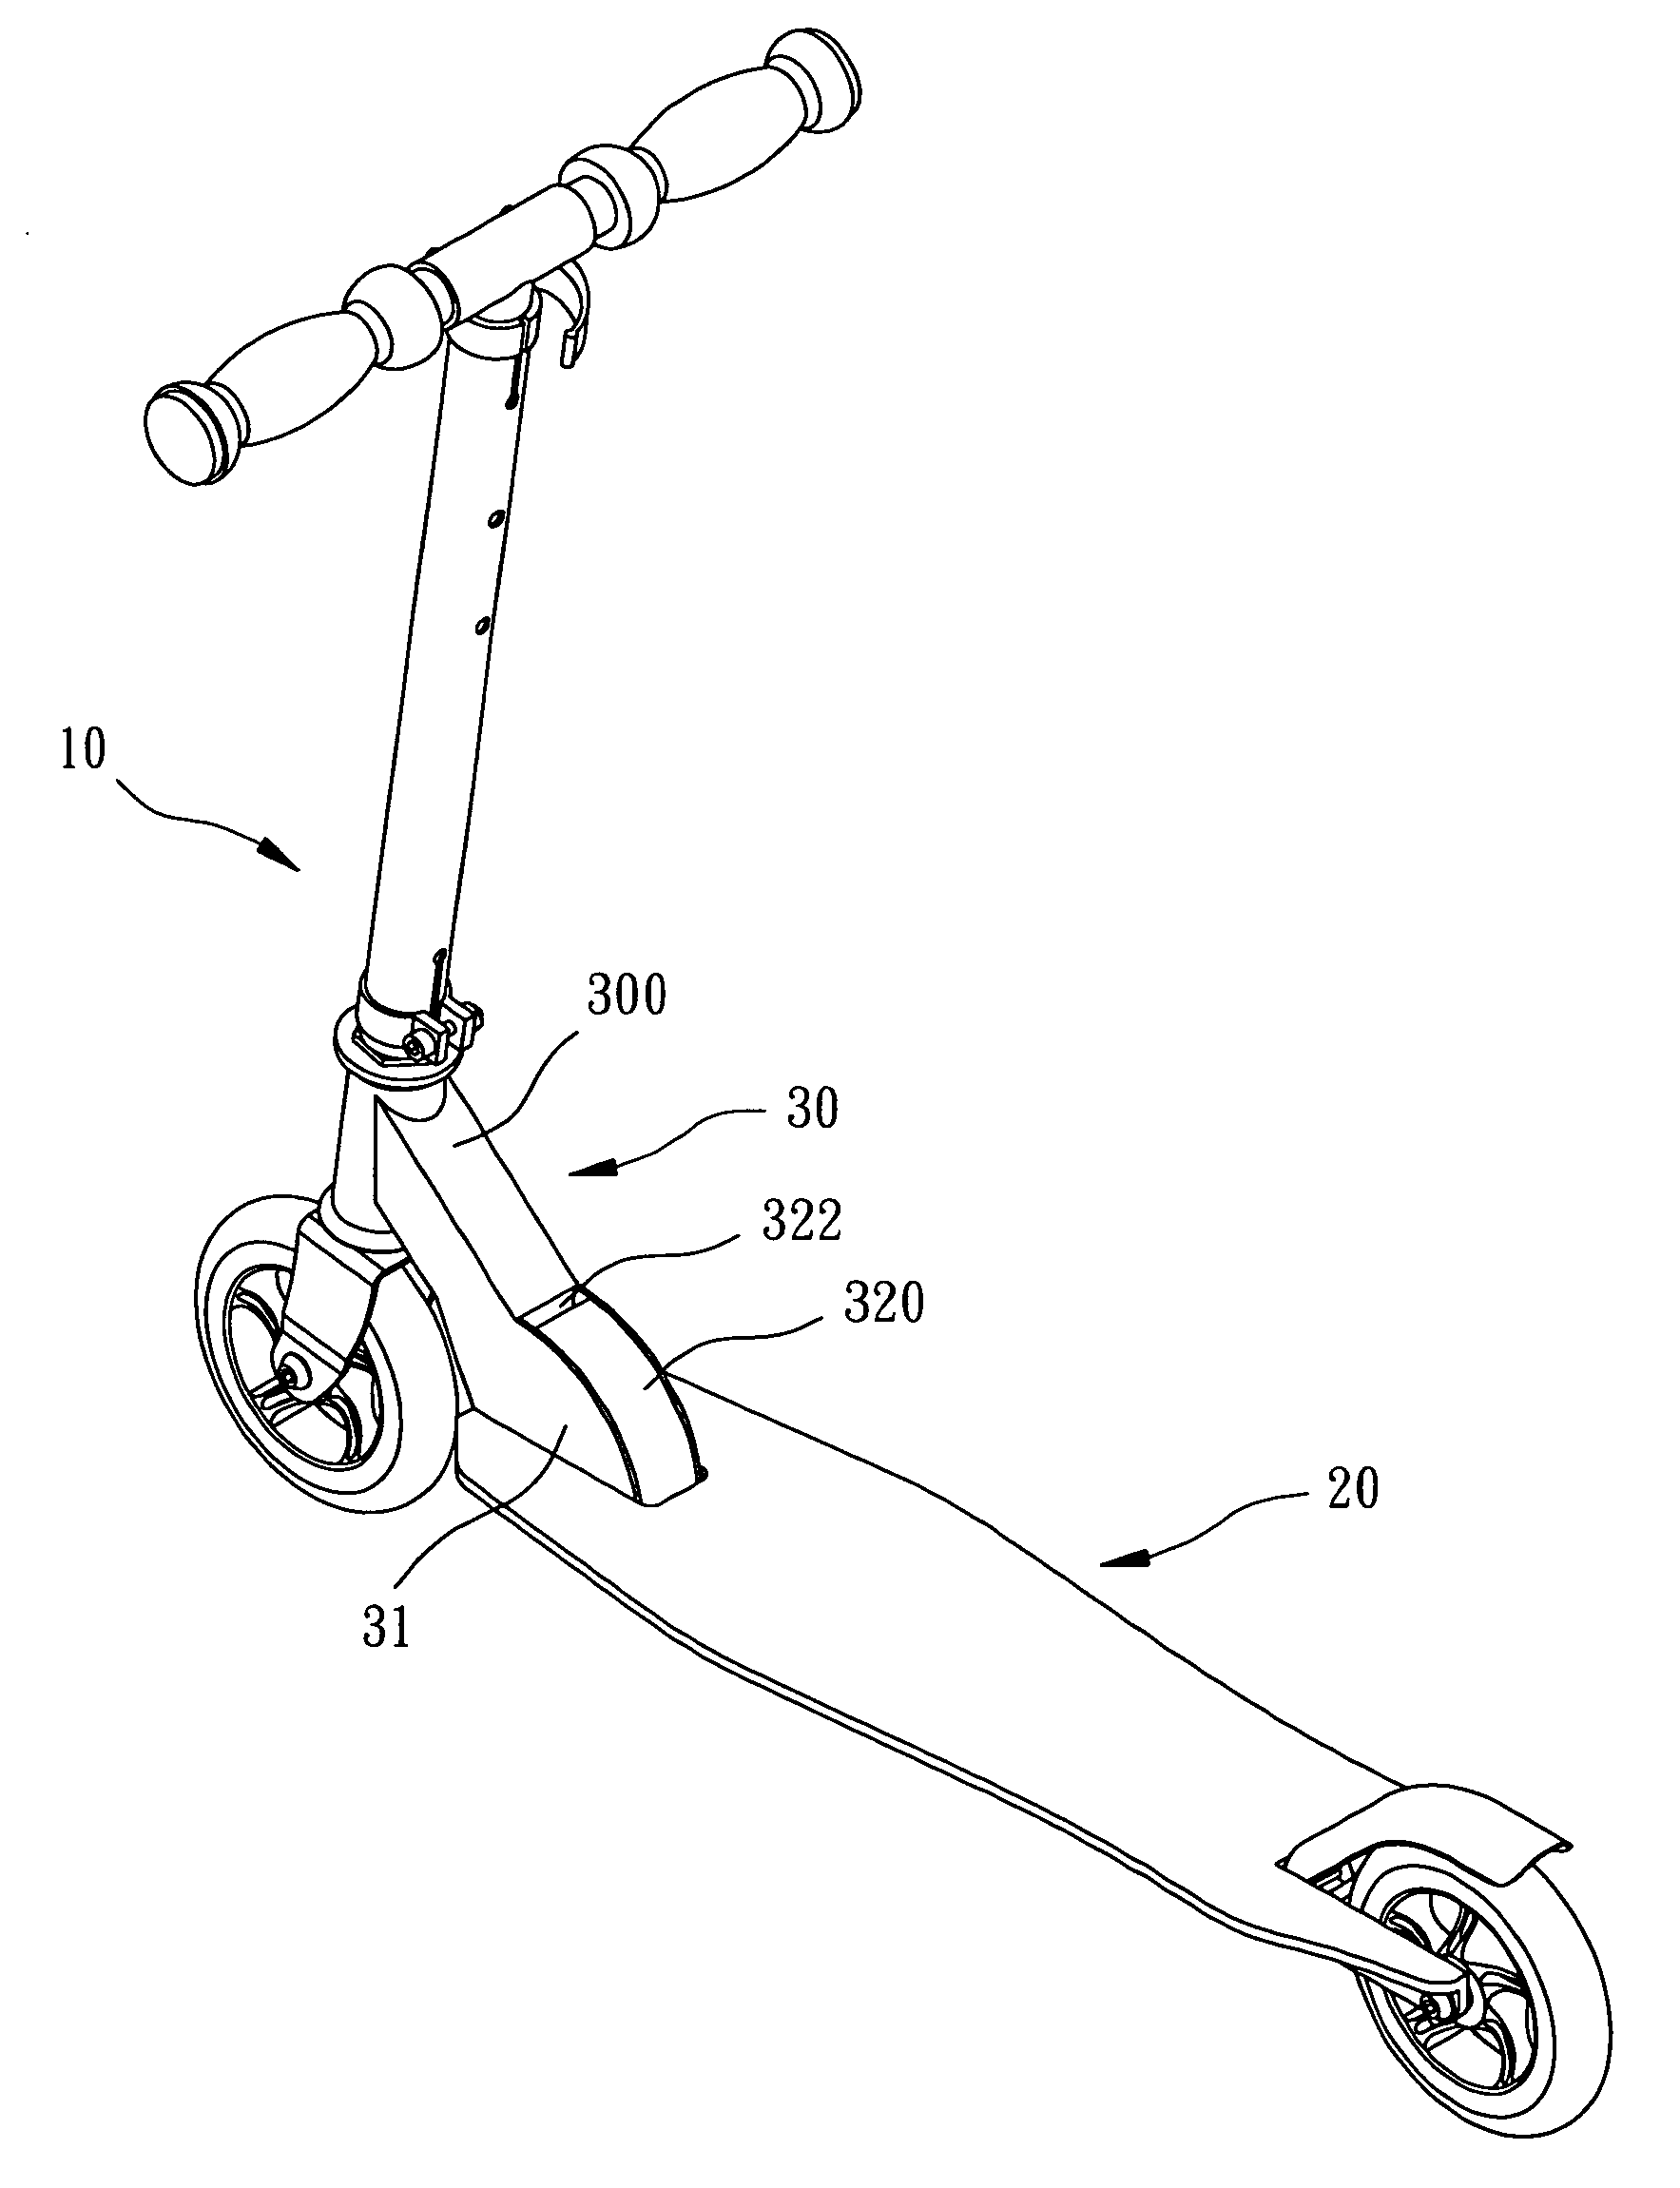 Folding device for scooters